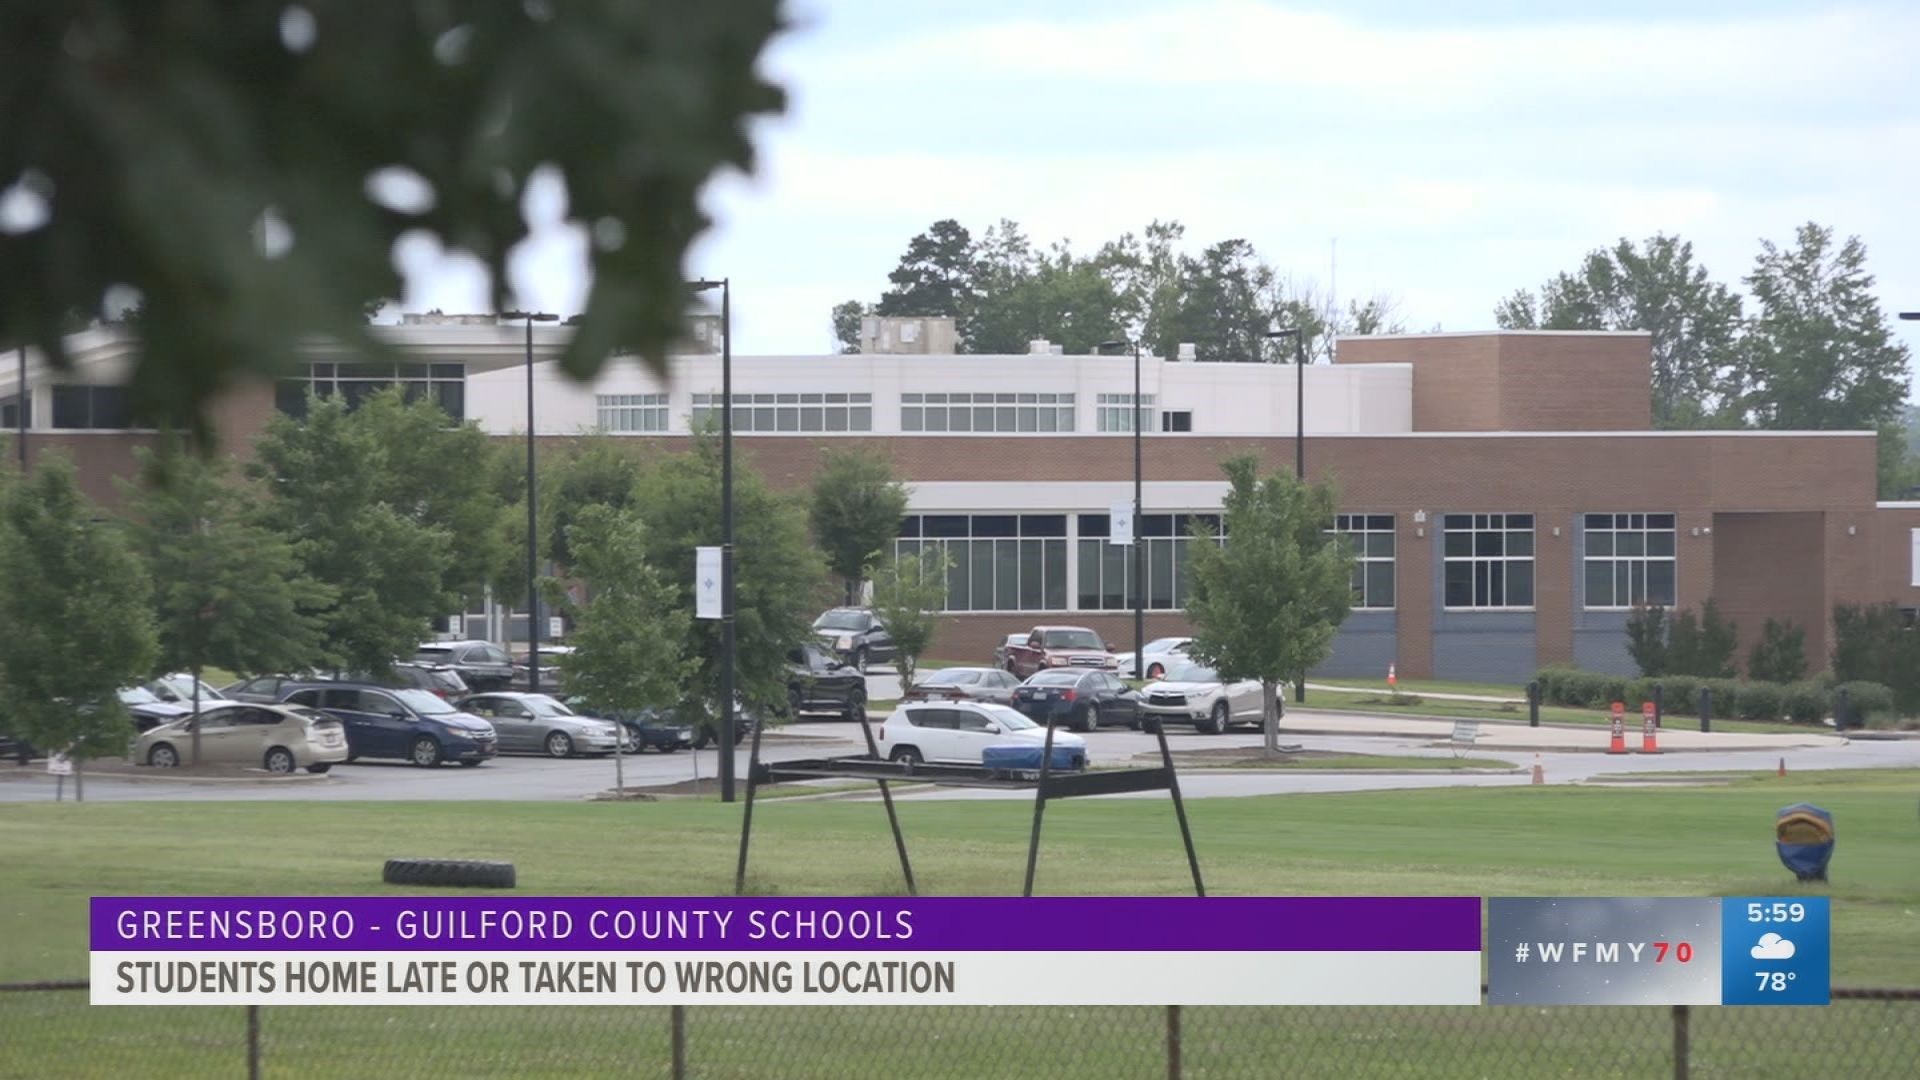 Guilford County Schools says they asked each child individually to verify if they were getting on the right bus which is what caused the delay.